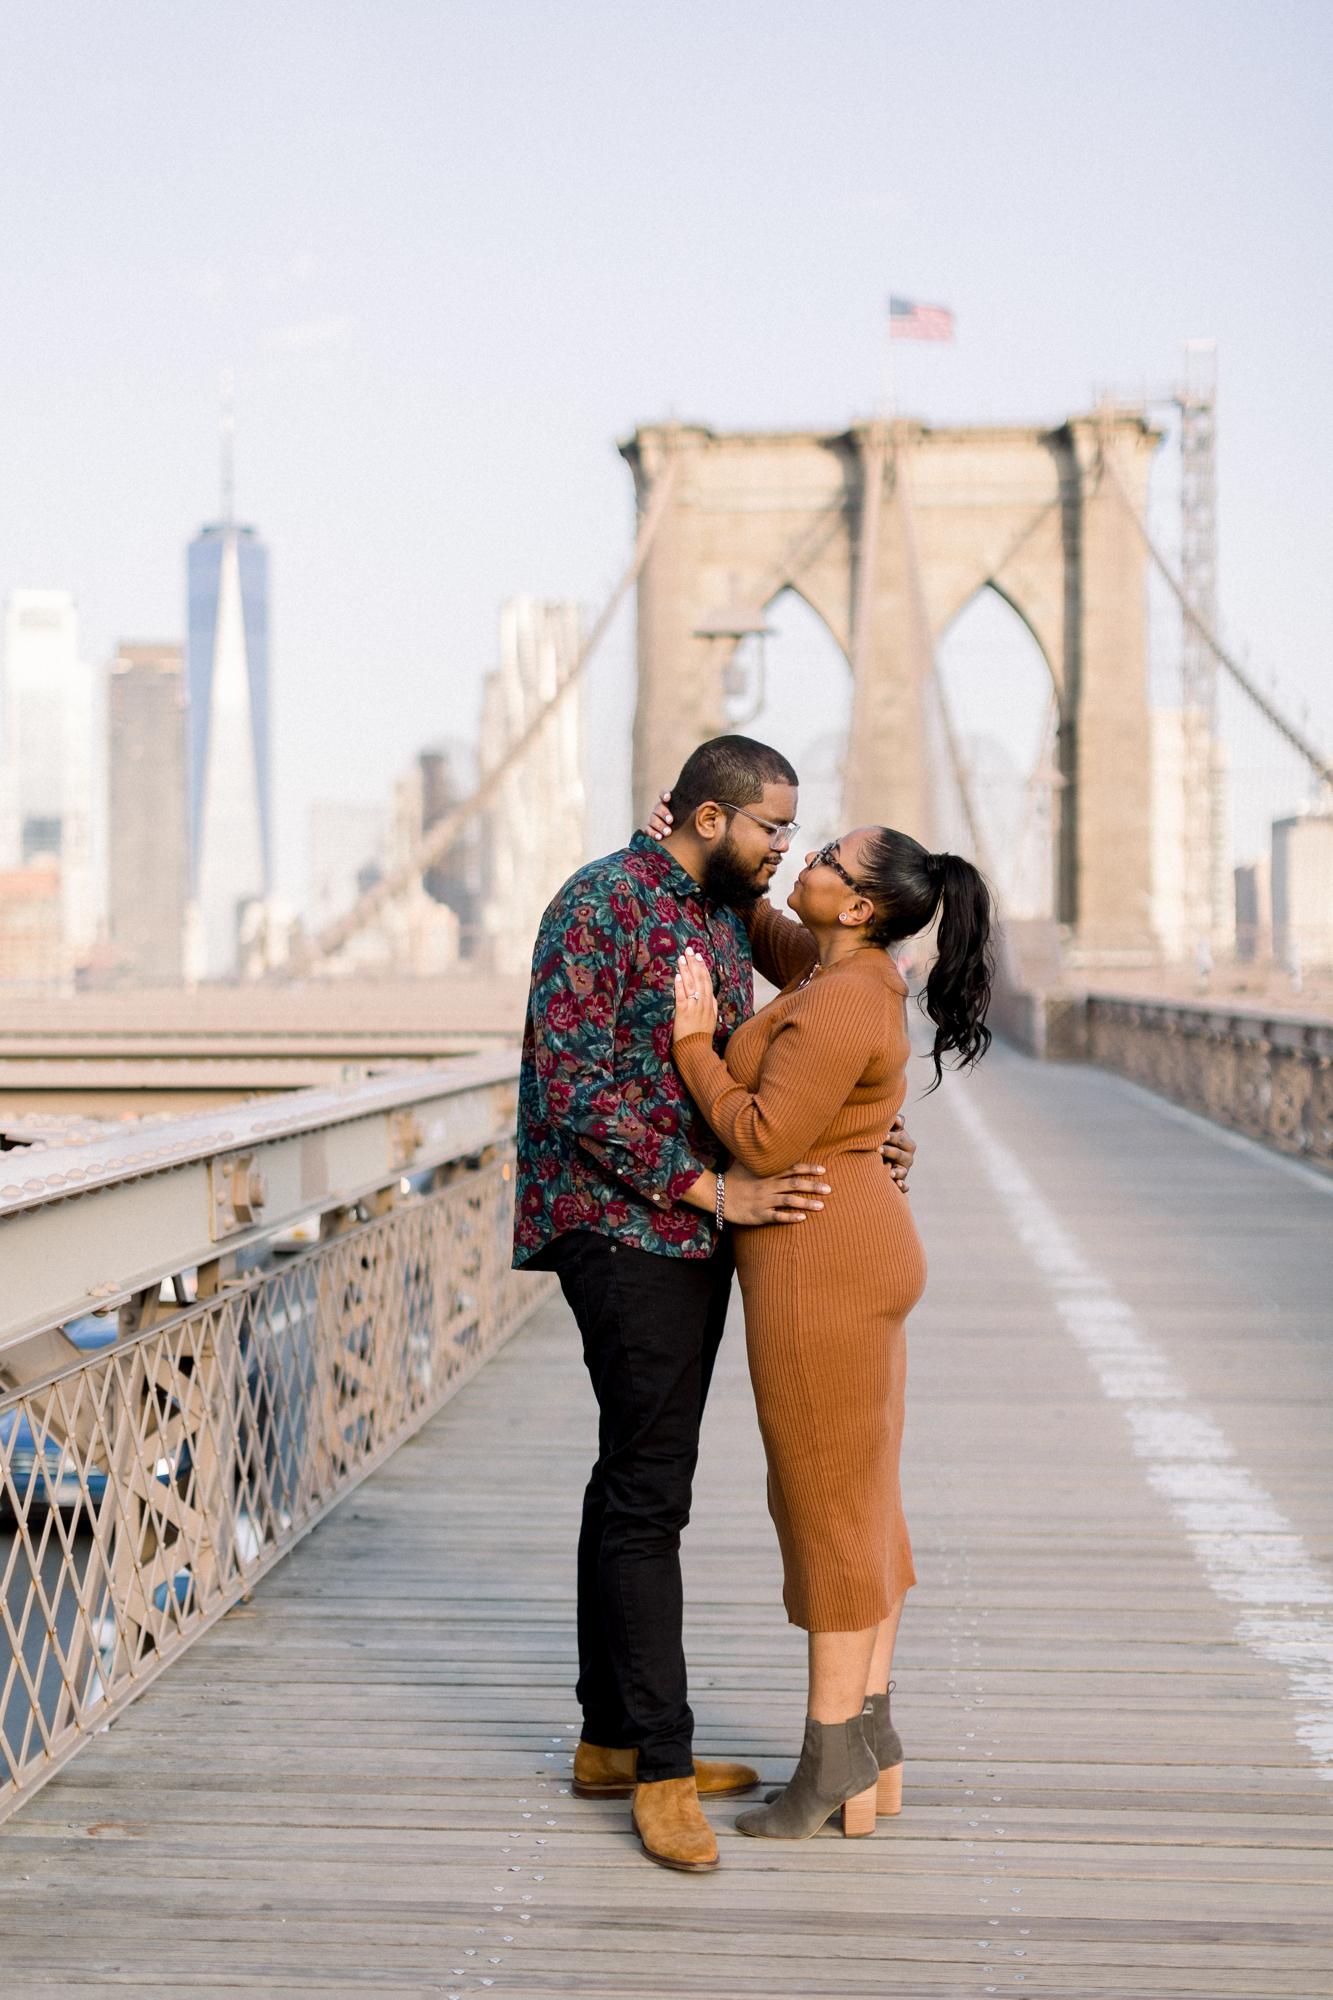 Outstanding Autumn DUMBO Engagement Photography at the Brooklyn Bridge